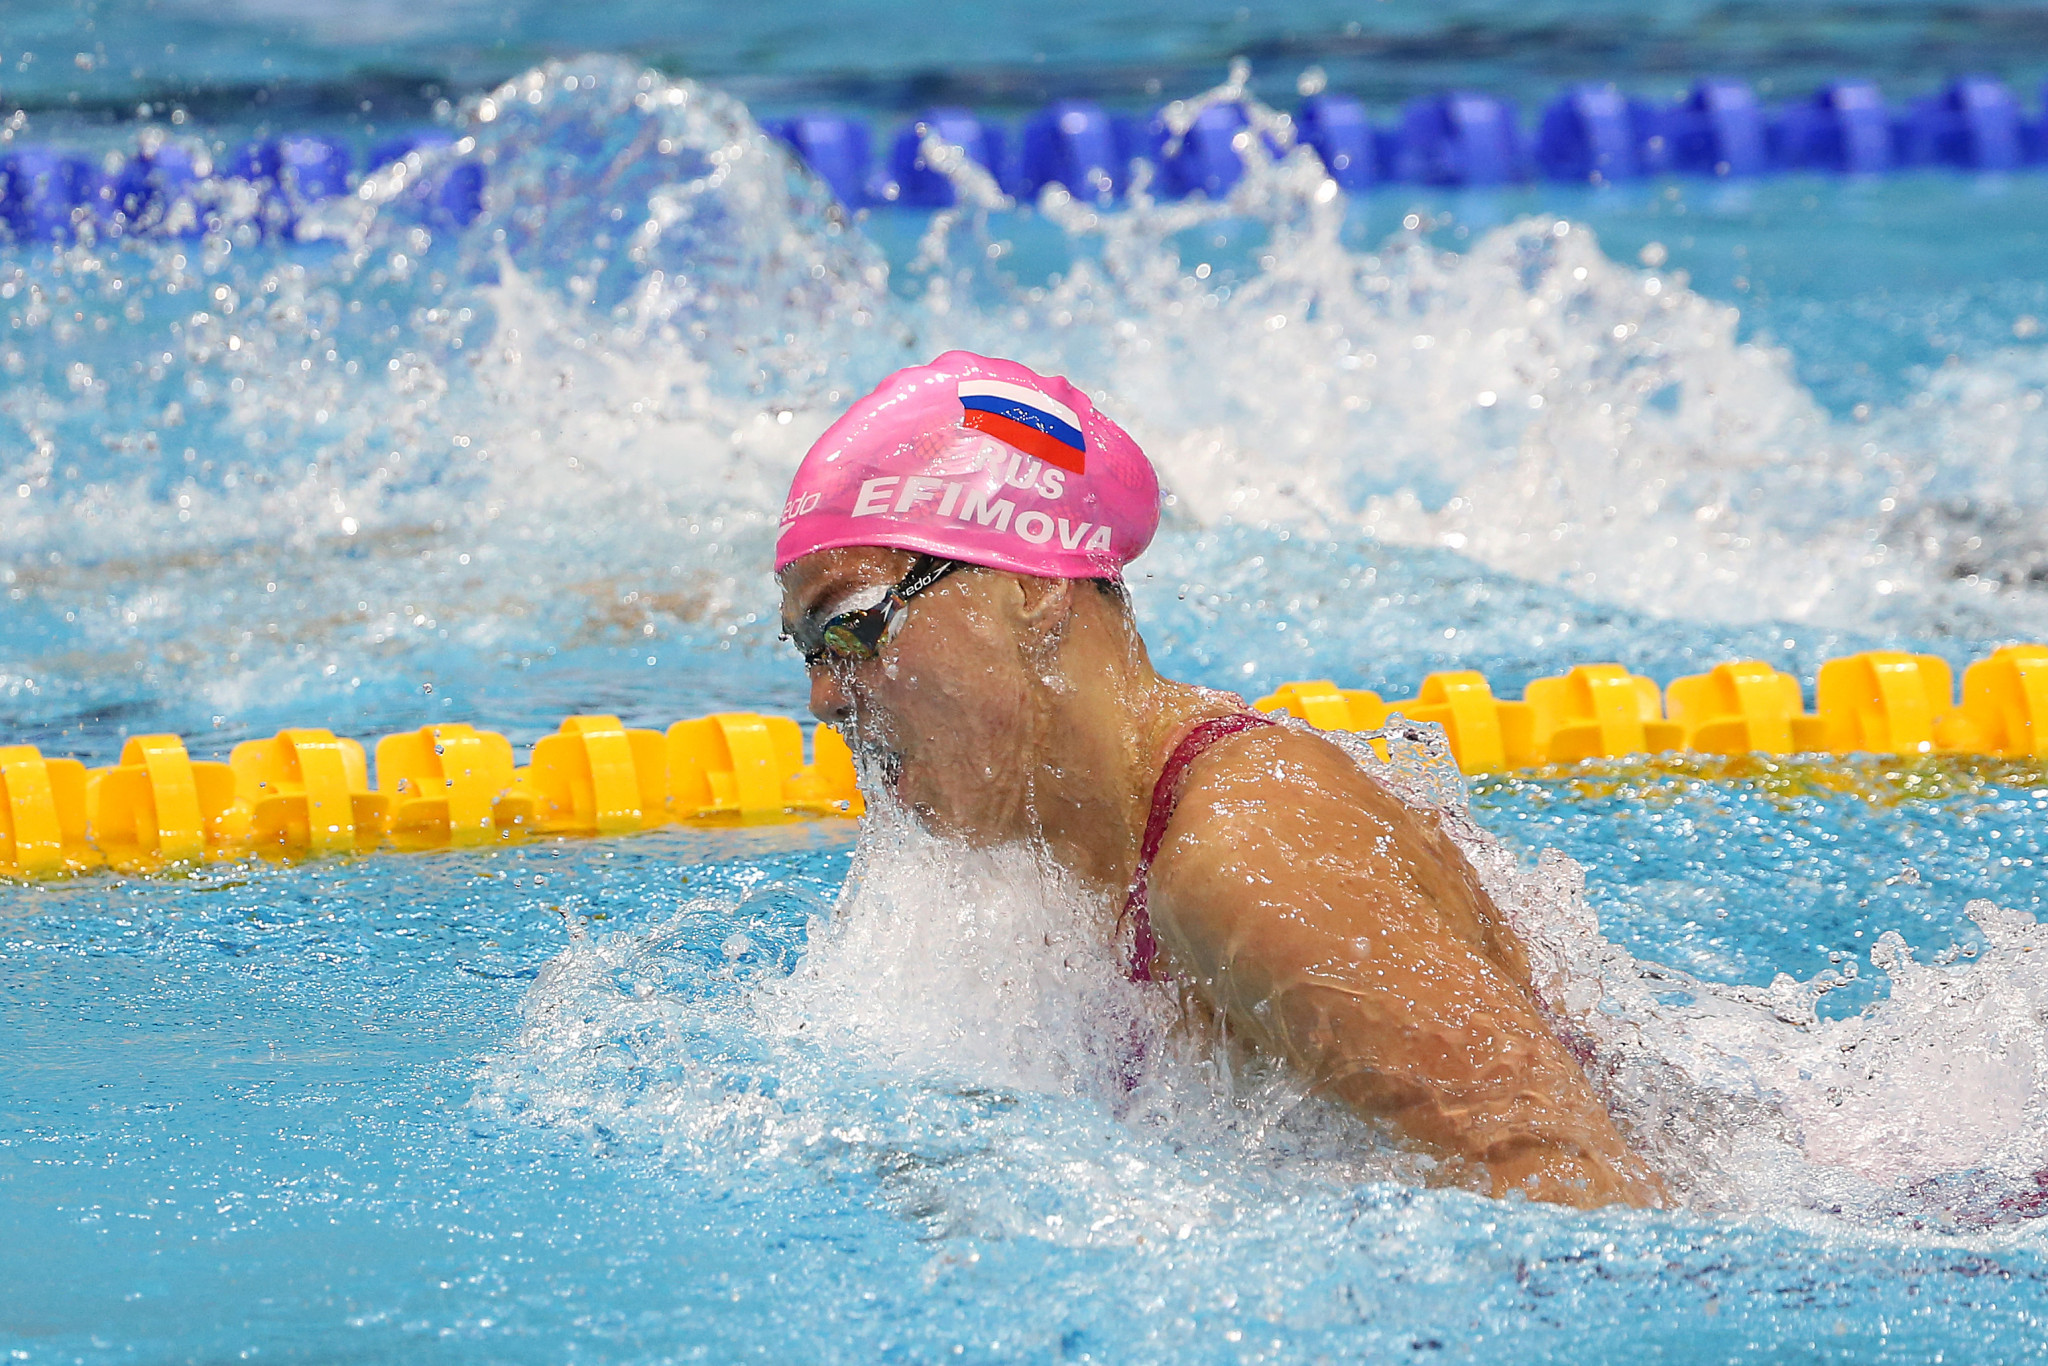 Yuliya Efimova set two world-leading times as she made her Champions Swim Series debut ©Getty Images